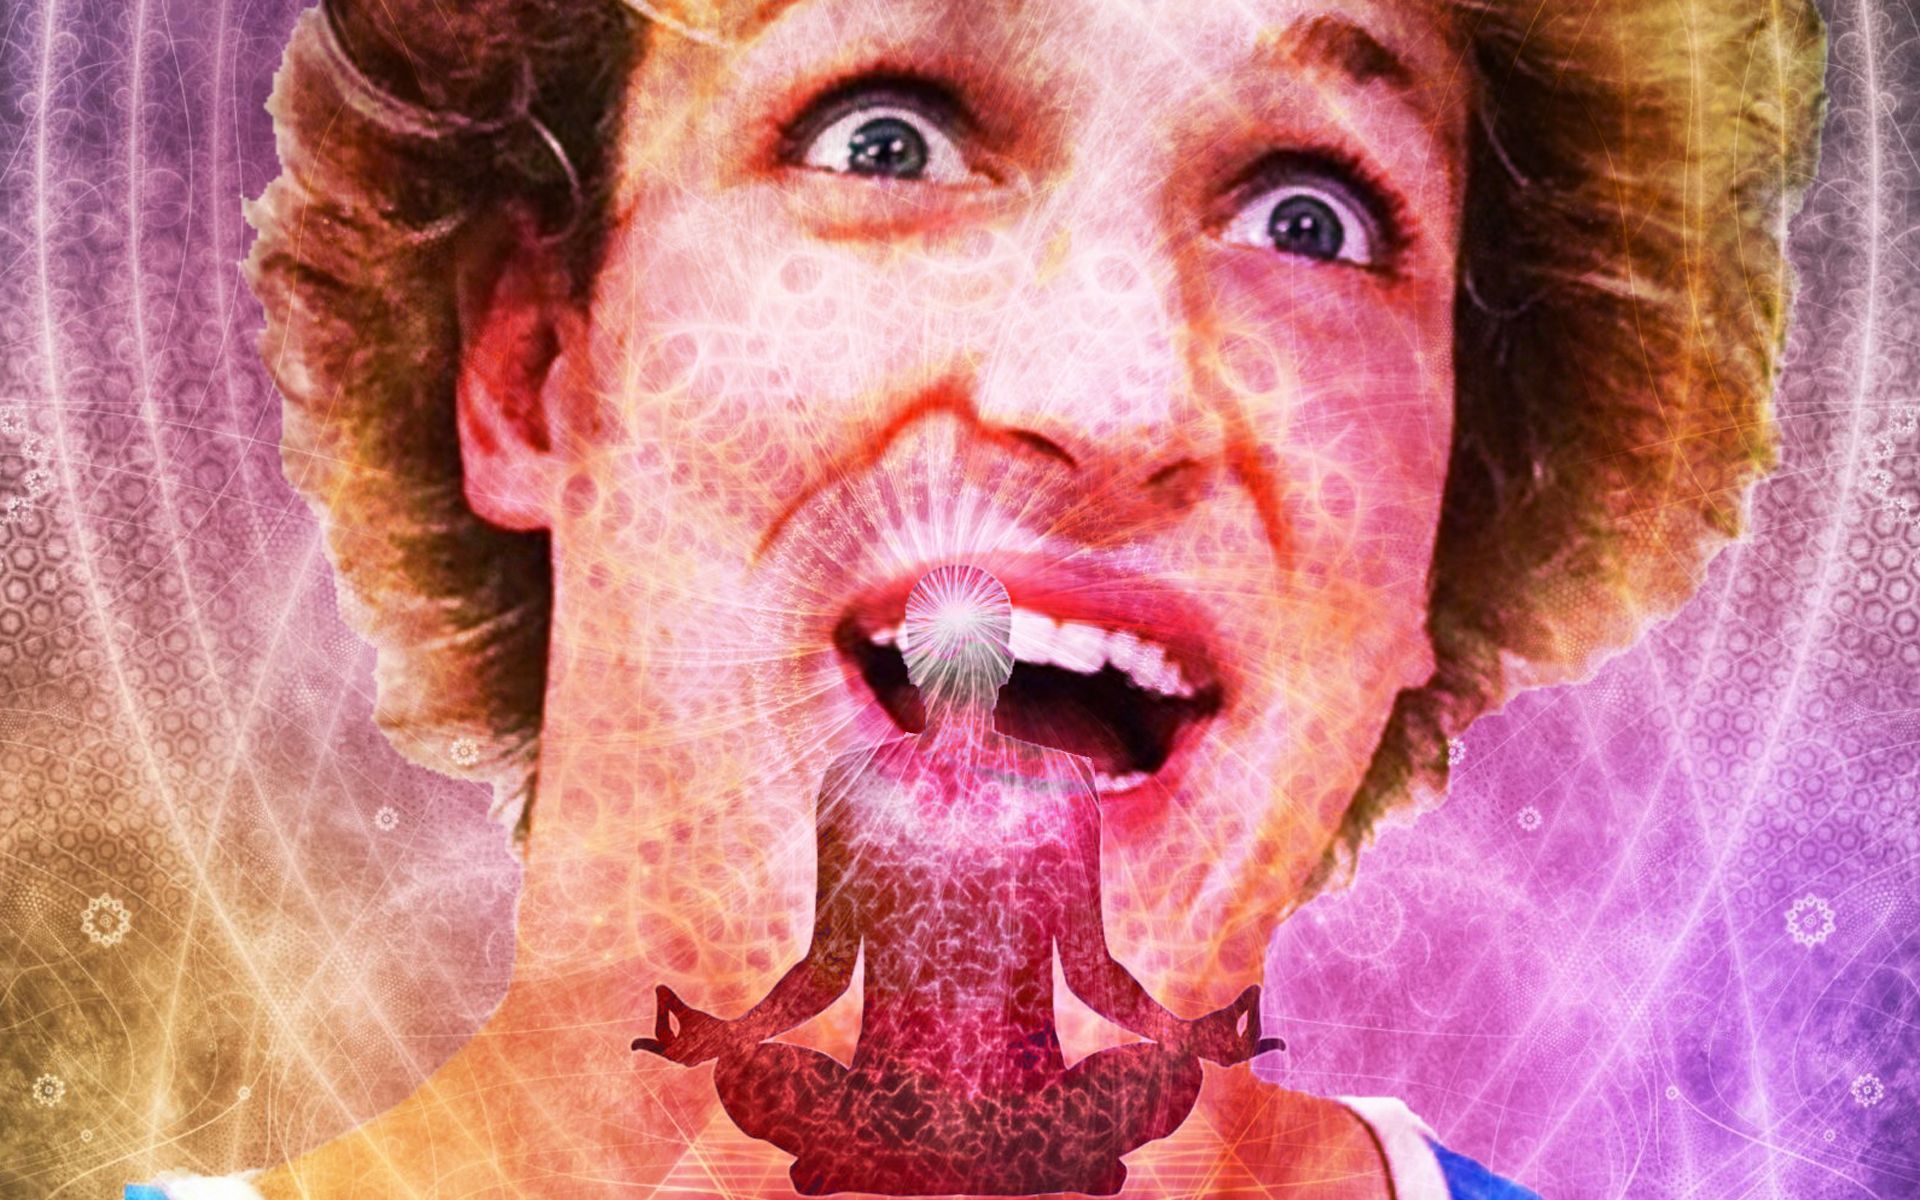 Logan Paul Exposed As Manifested Egregore Of The Worst Person Everyone Grew Up With